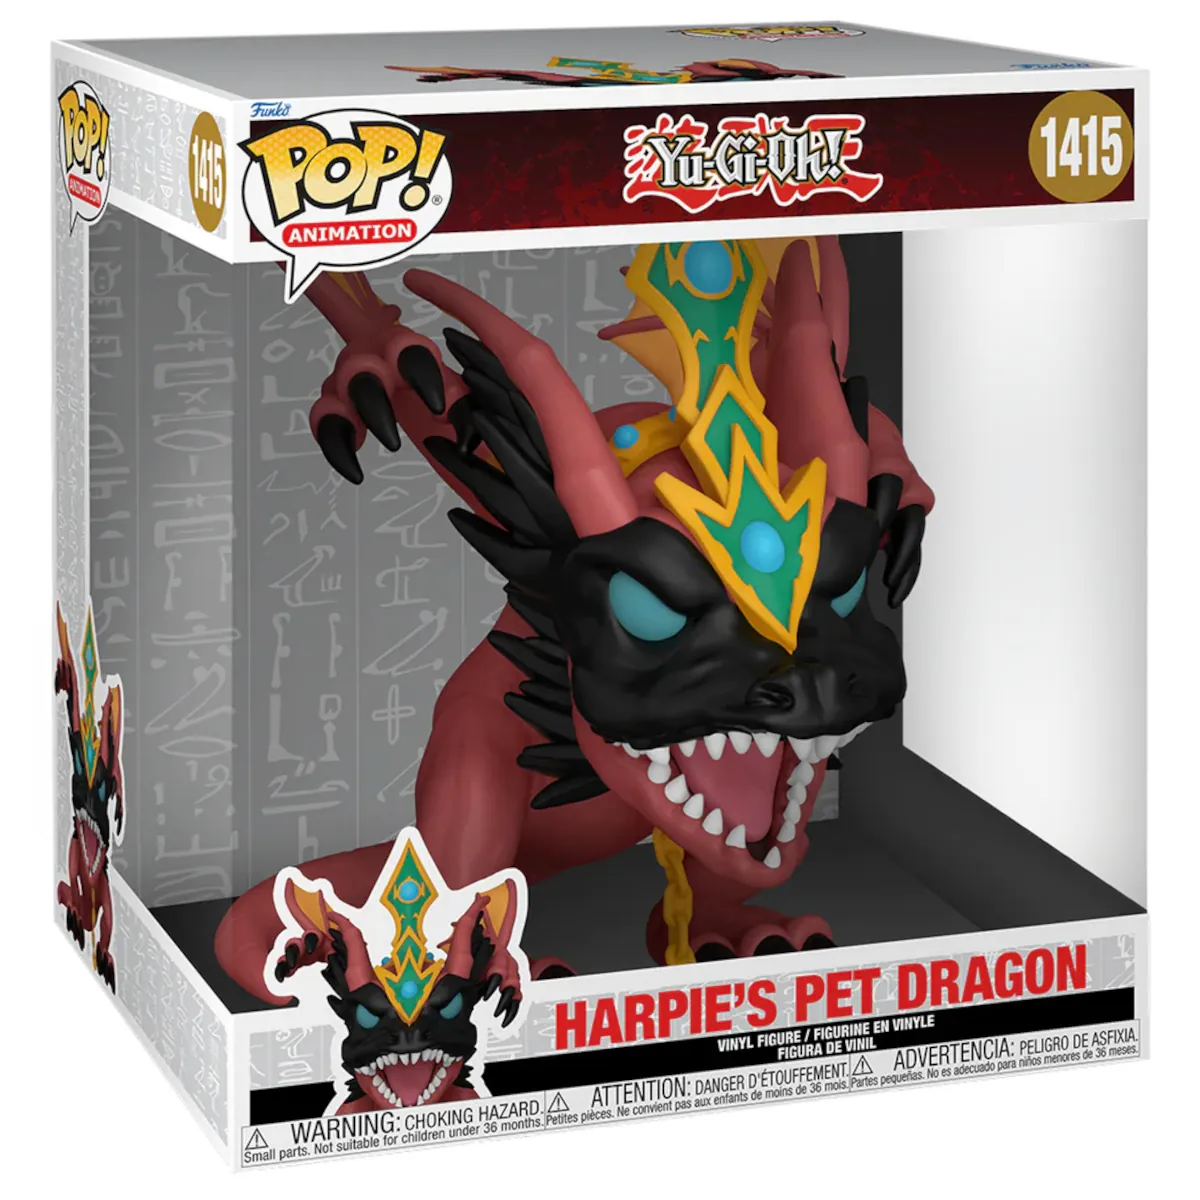 FK73629 Funko Pop! Animation - Yu-Gi-Oh! - Harpie's Pet Dragon Super Sized Collectable Vinyl Figure Box Front